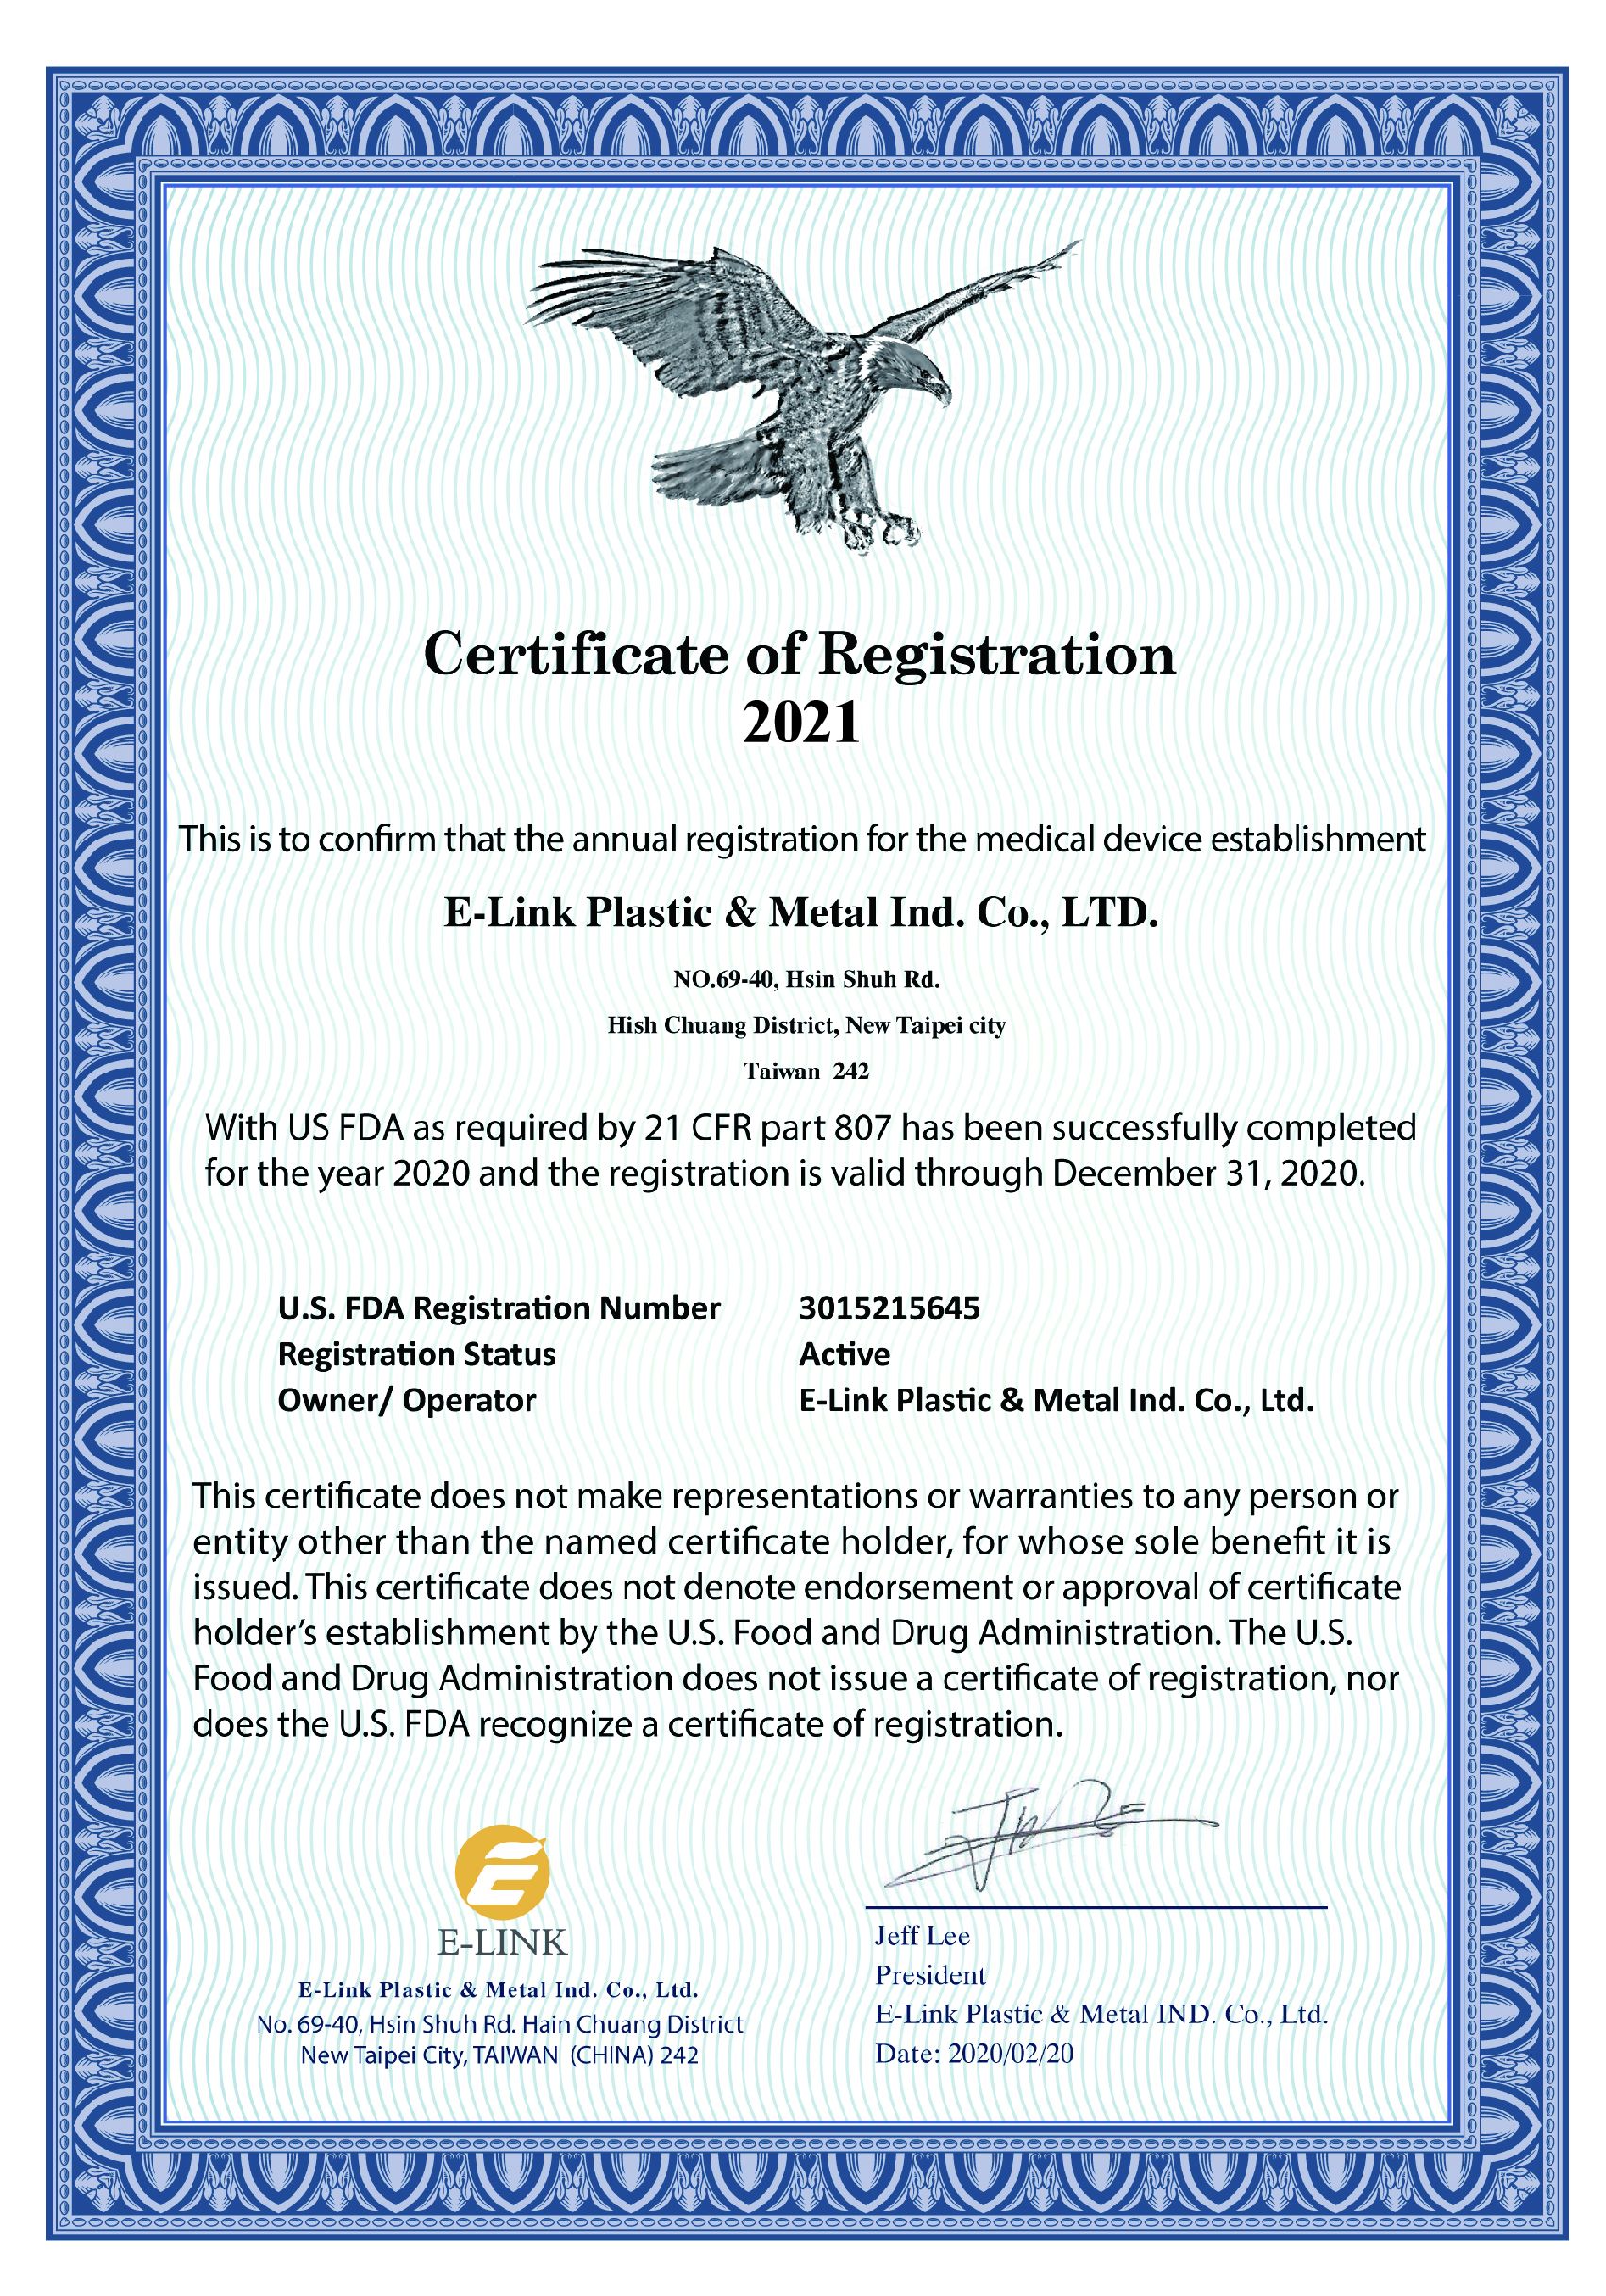 E-link Pill boxes have obtained FDA approval certification